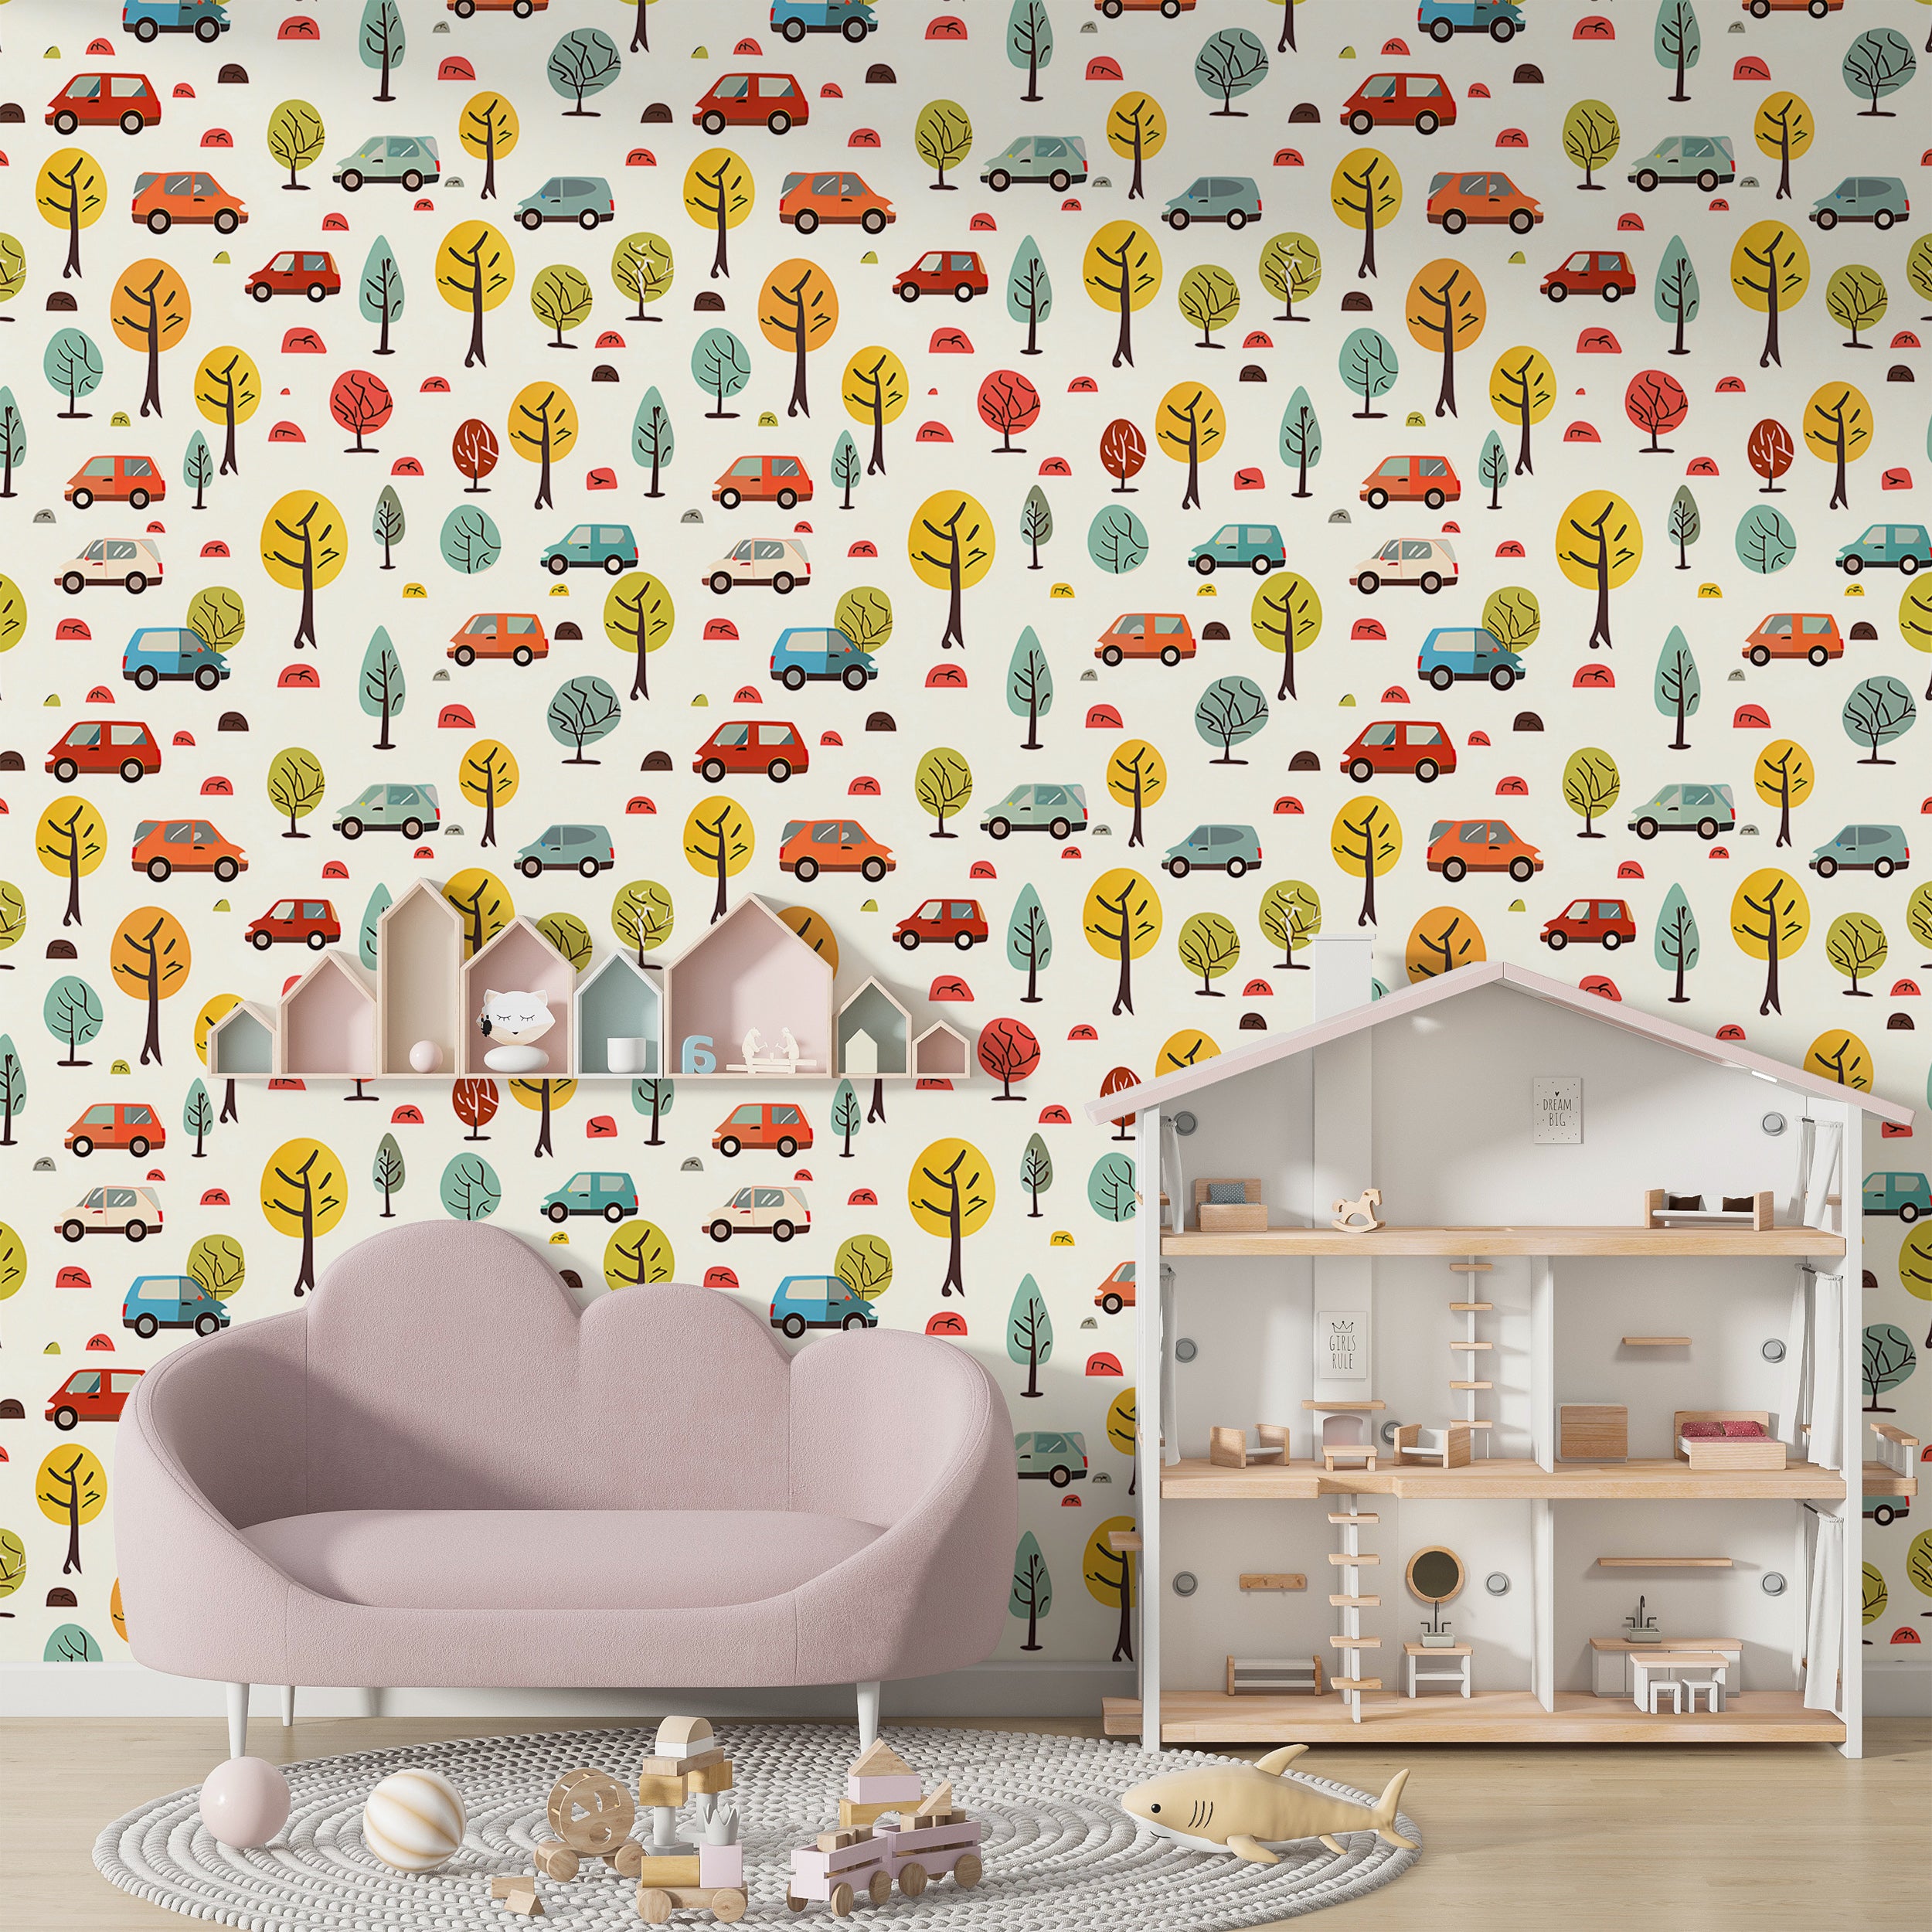 Cars and Trees Wallpaper, Colorful Nursery Wallpaper, Watercolor Kids Room Peel and Stick Wall Decor, Cars and Trees Removable PVC-free